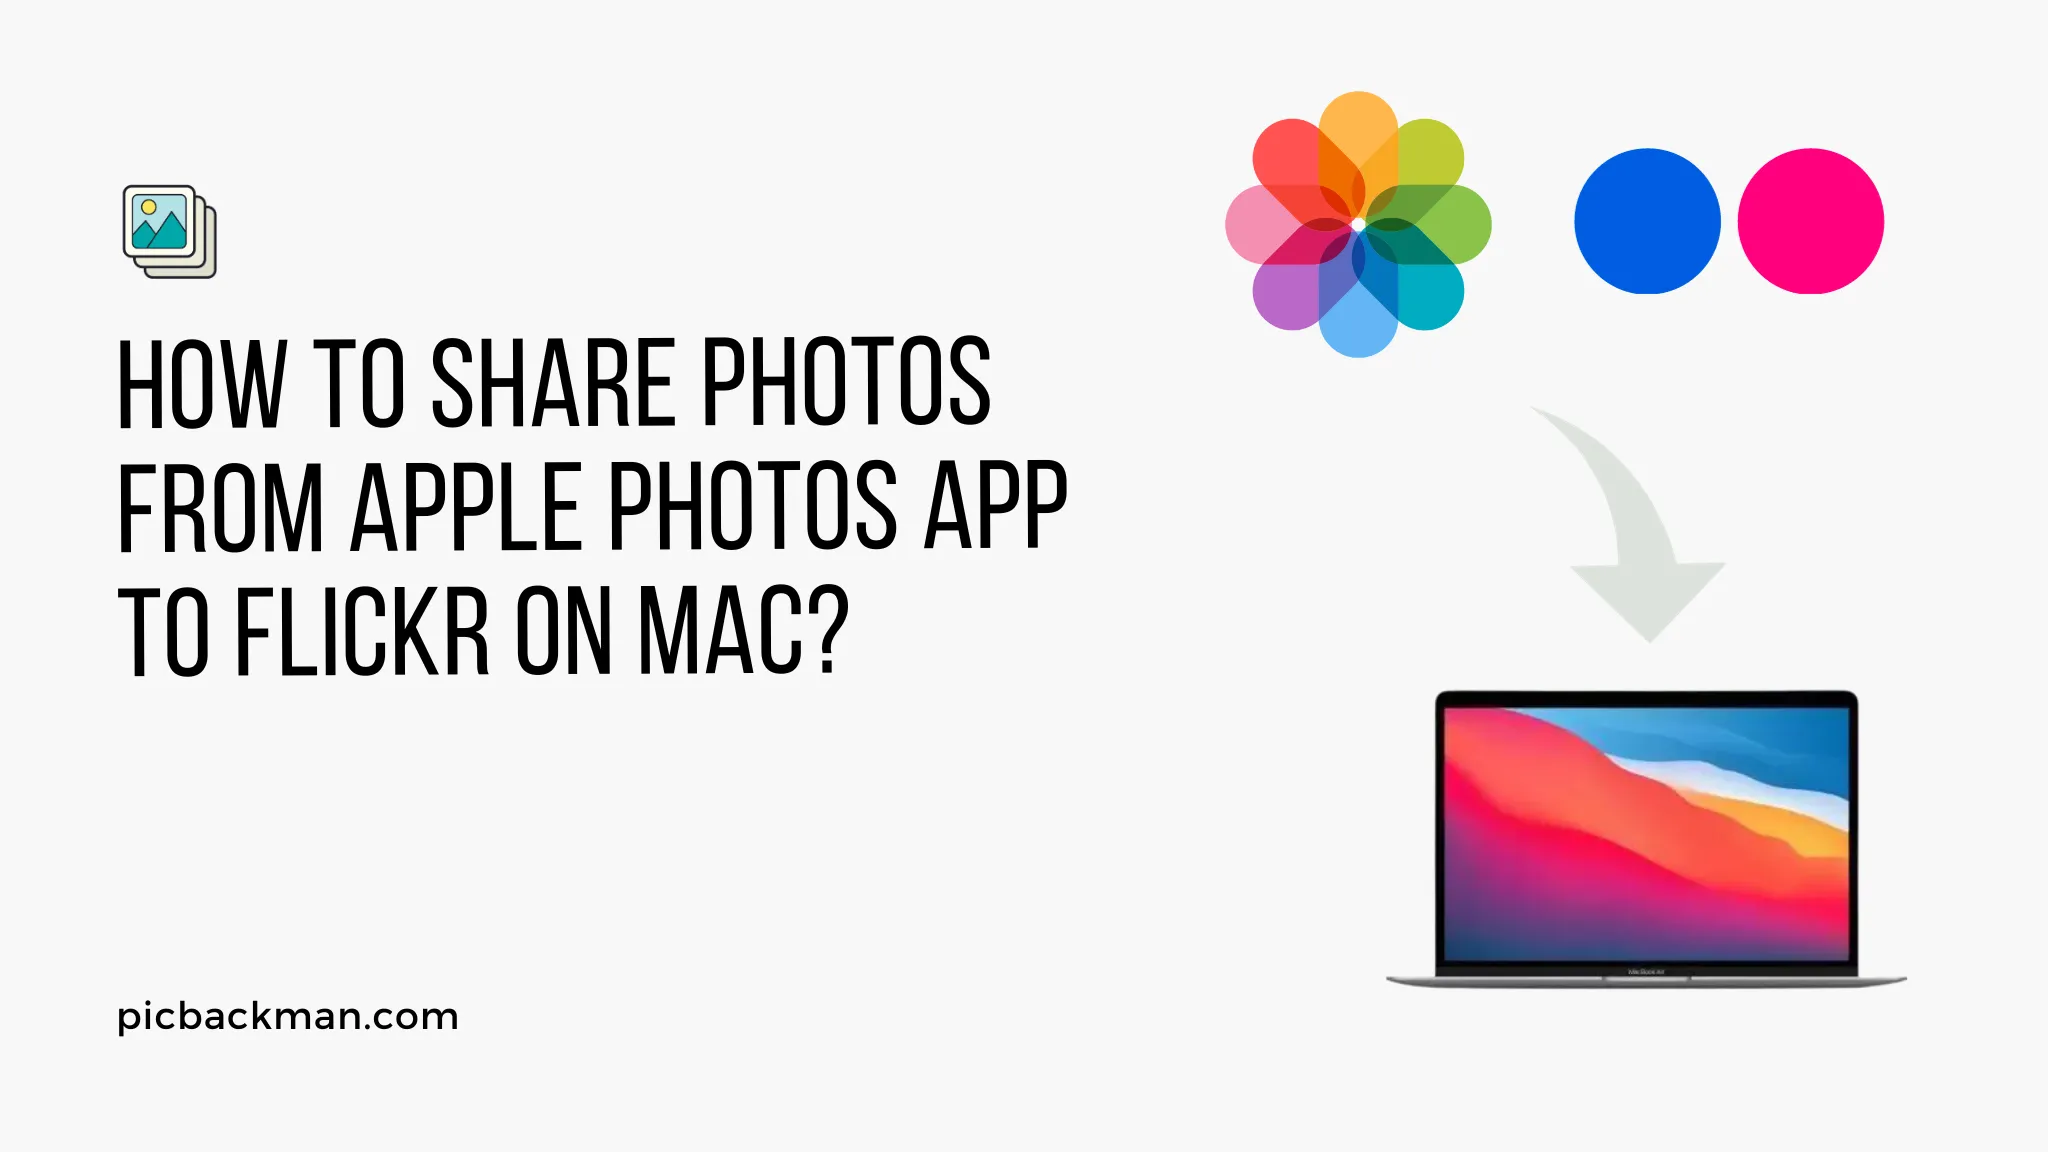 How to Share Photos from Apple Photos app to Flickr on Mac?